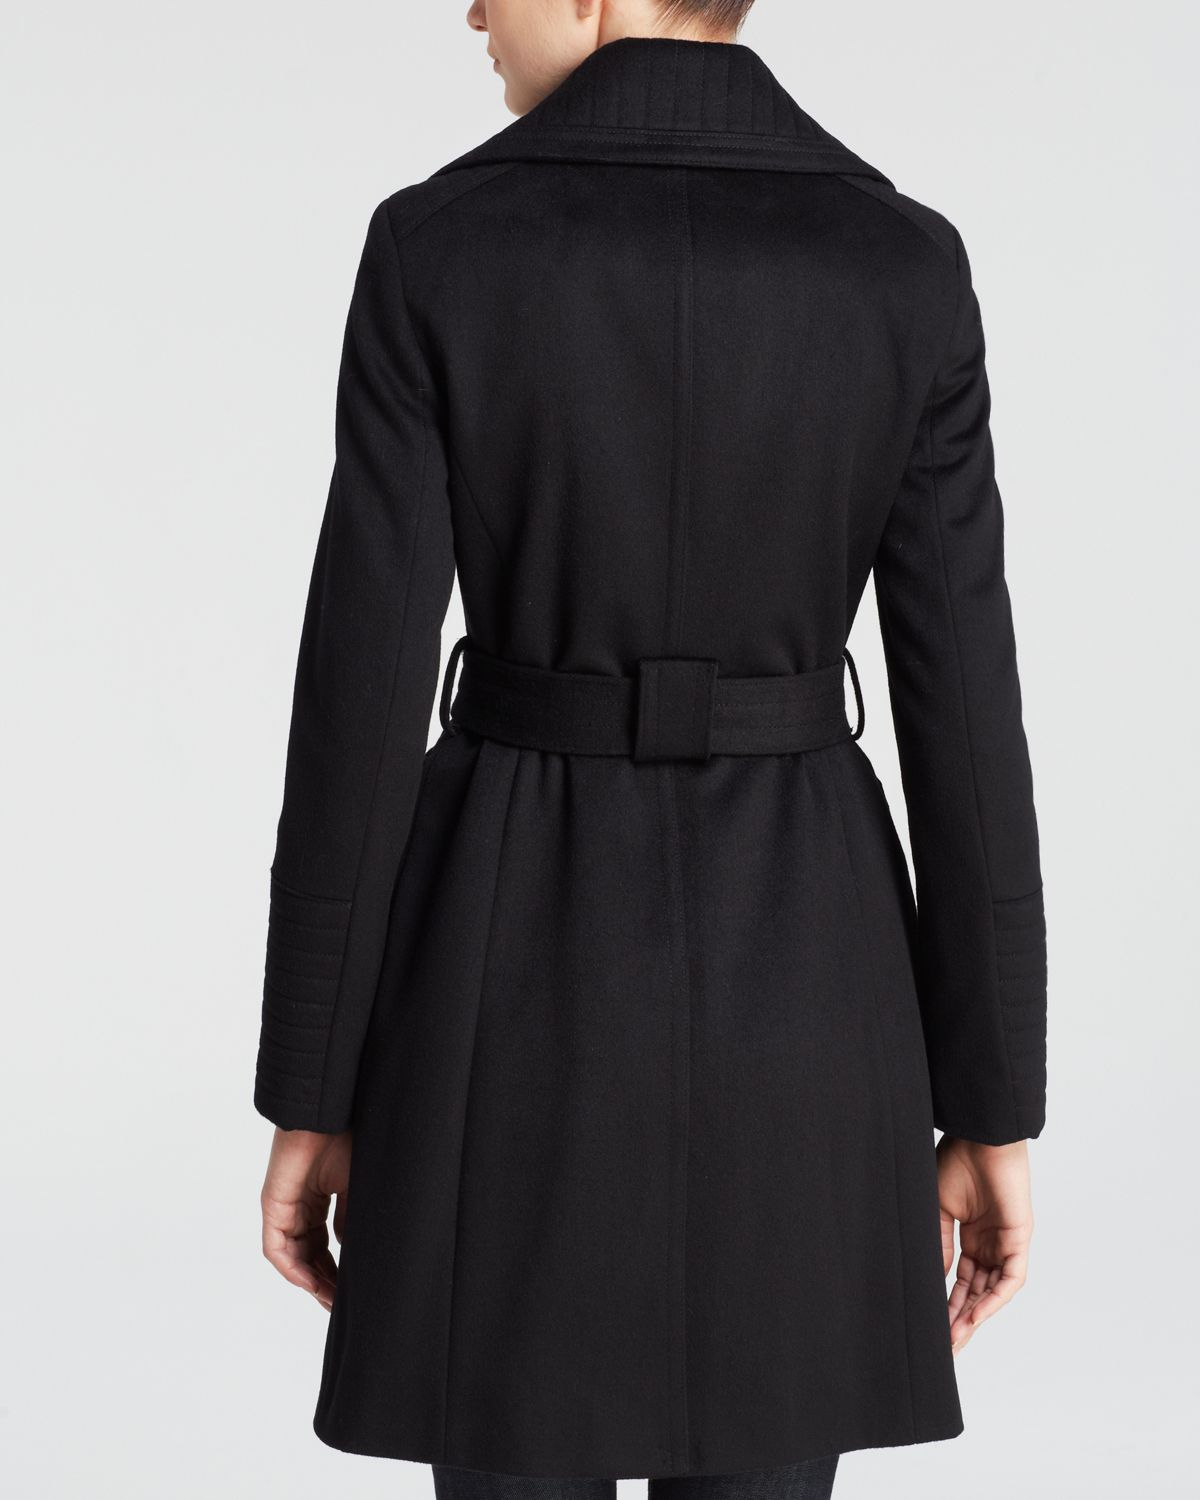 Lyst - Laundry By Shelli Segal Belted Military Wool Coat in Black